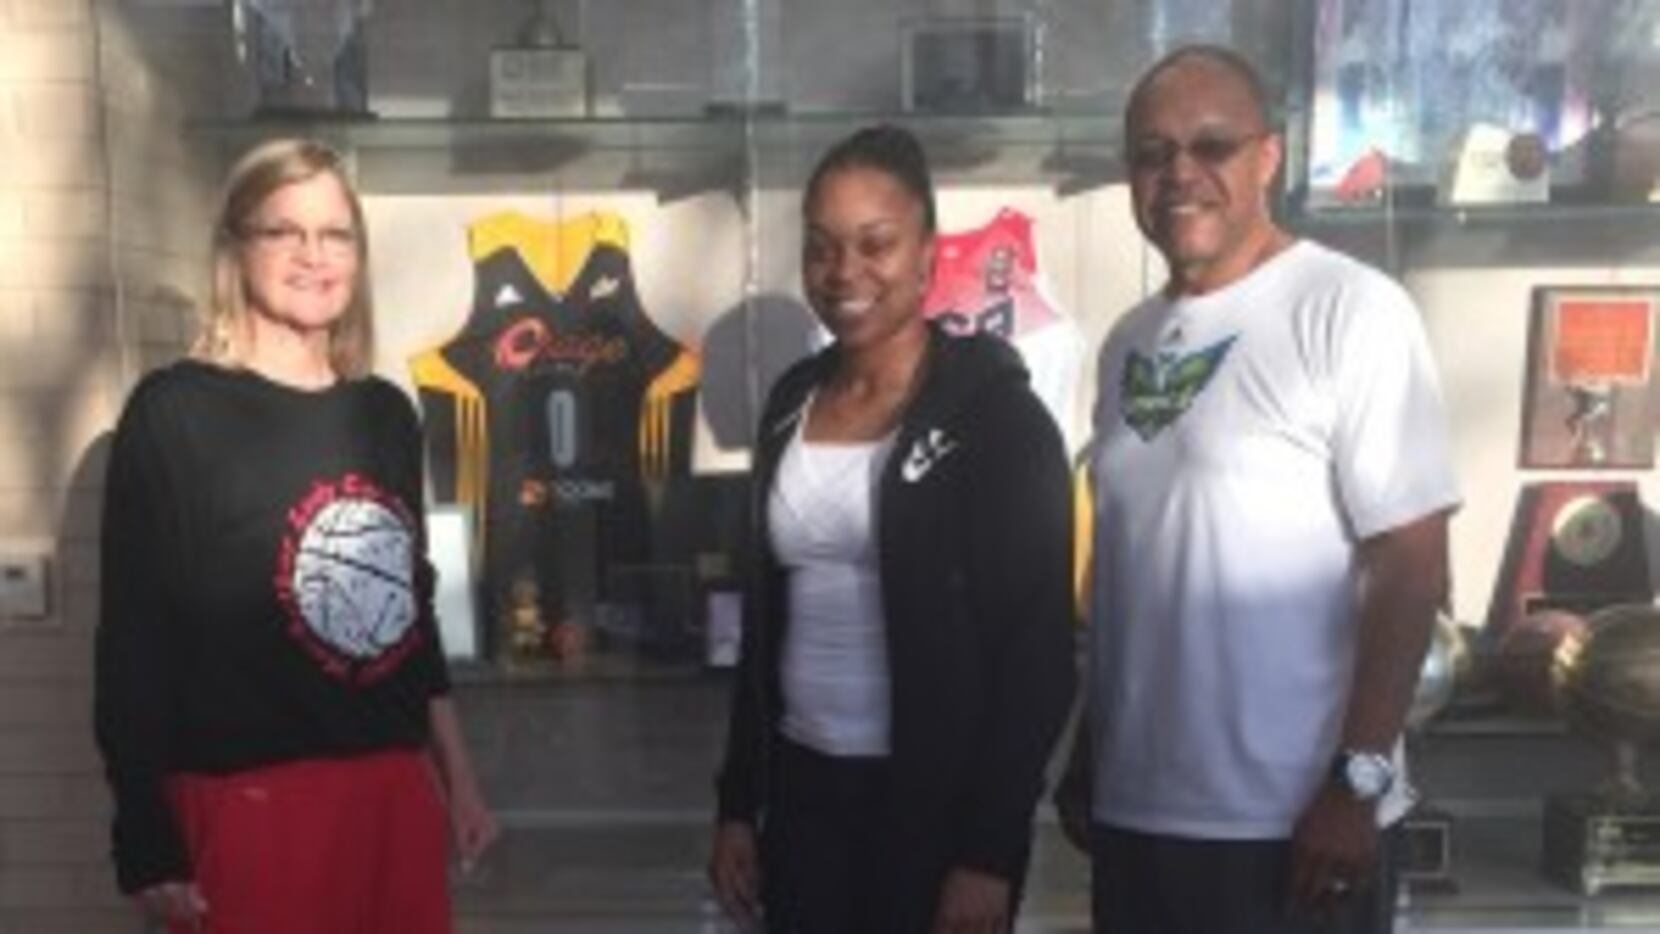  MacArthur High coach Suzie Oelschlegel (left) welcomed her former player Odyssey Sims and...